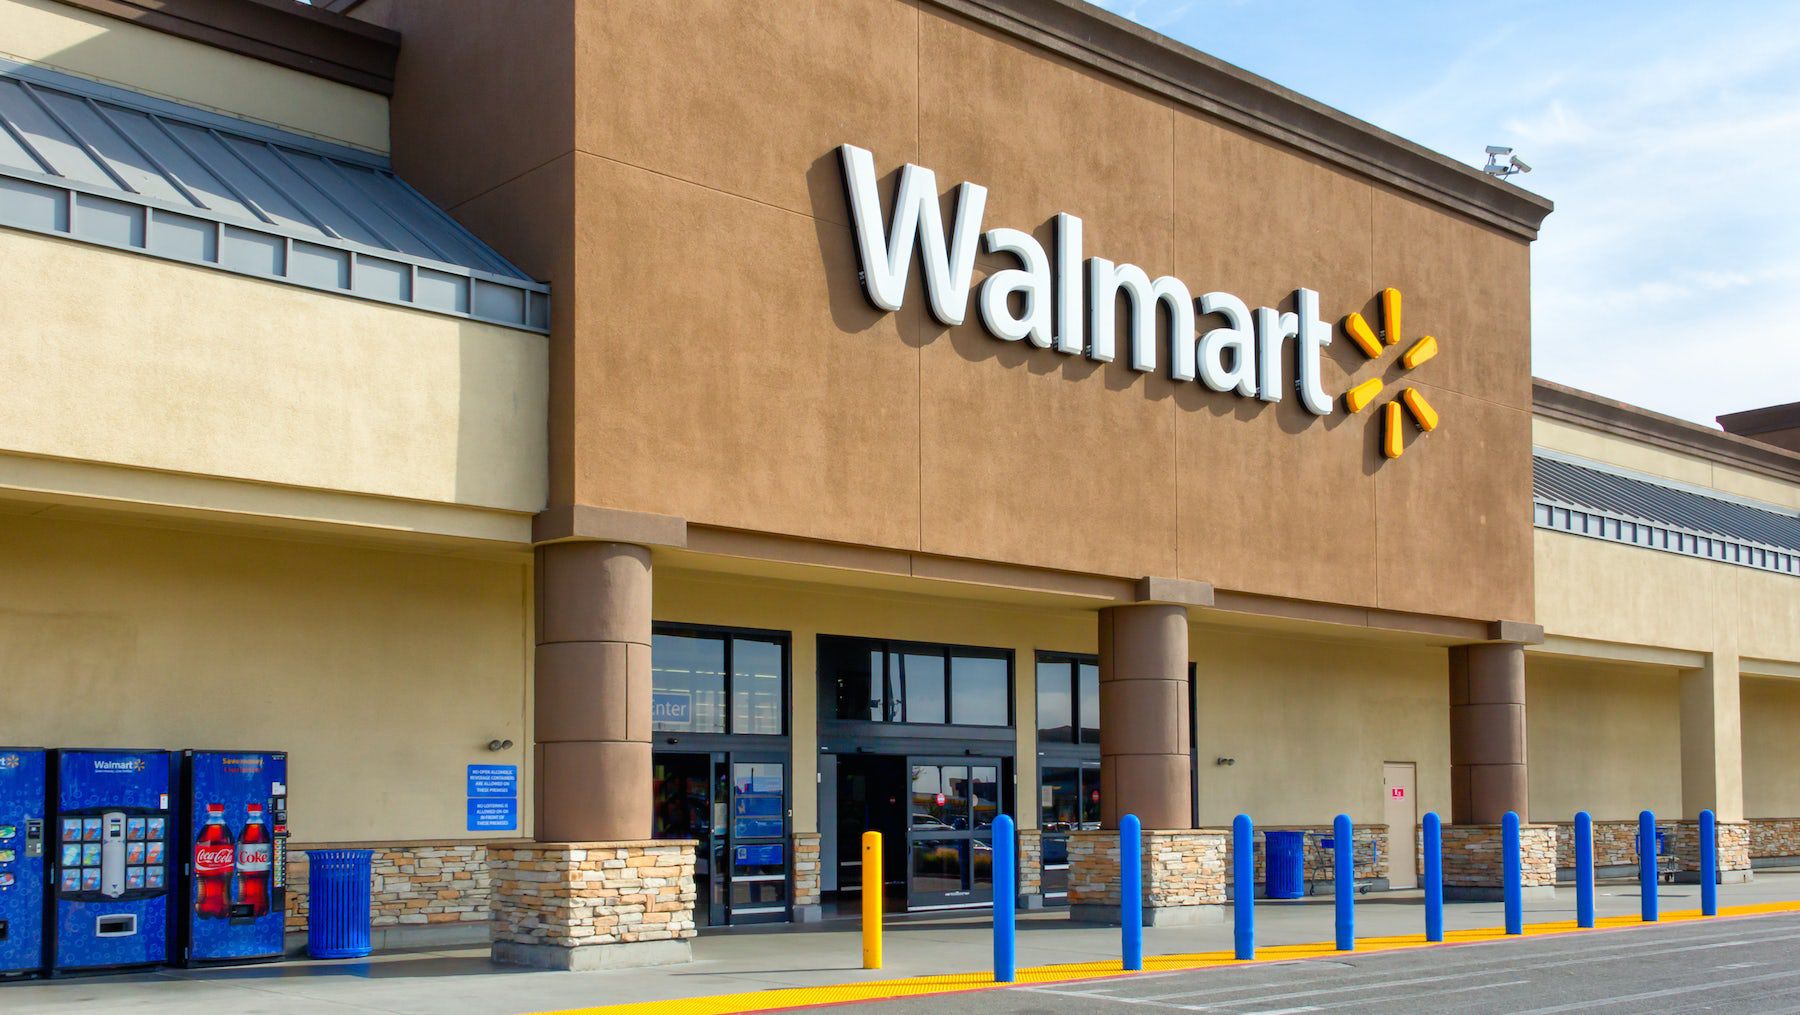 Walmart Maps Out Plan to Boost Market Share, Improve Efficiency